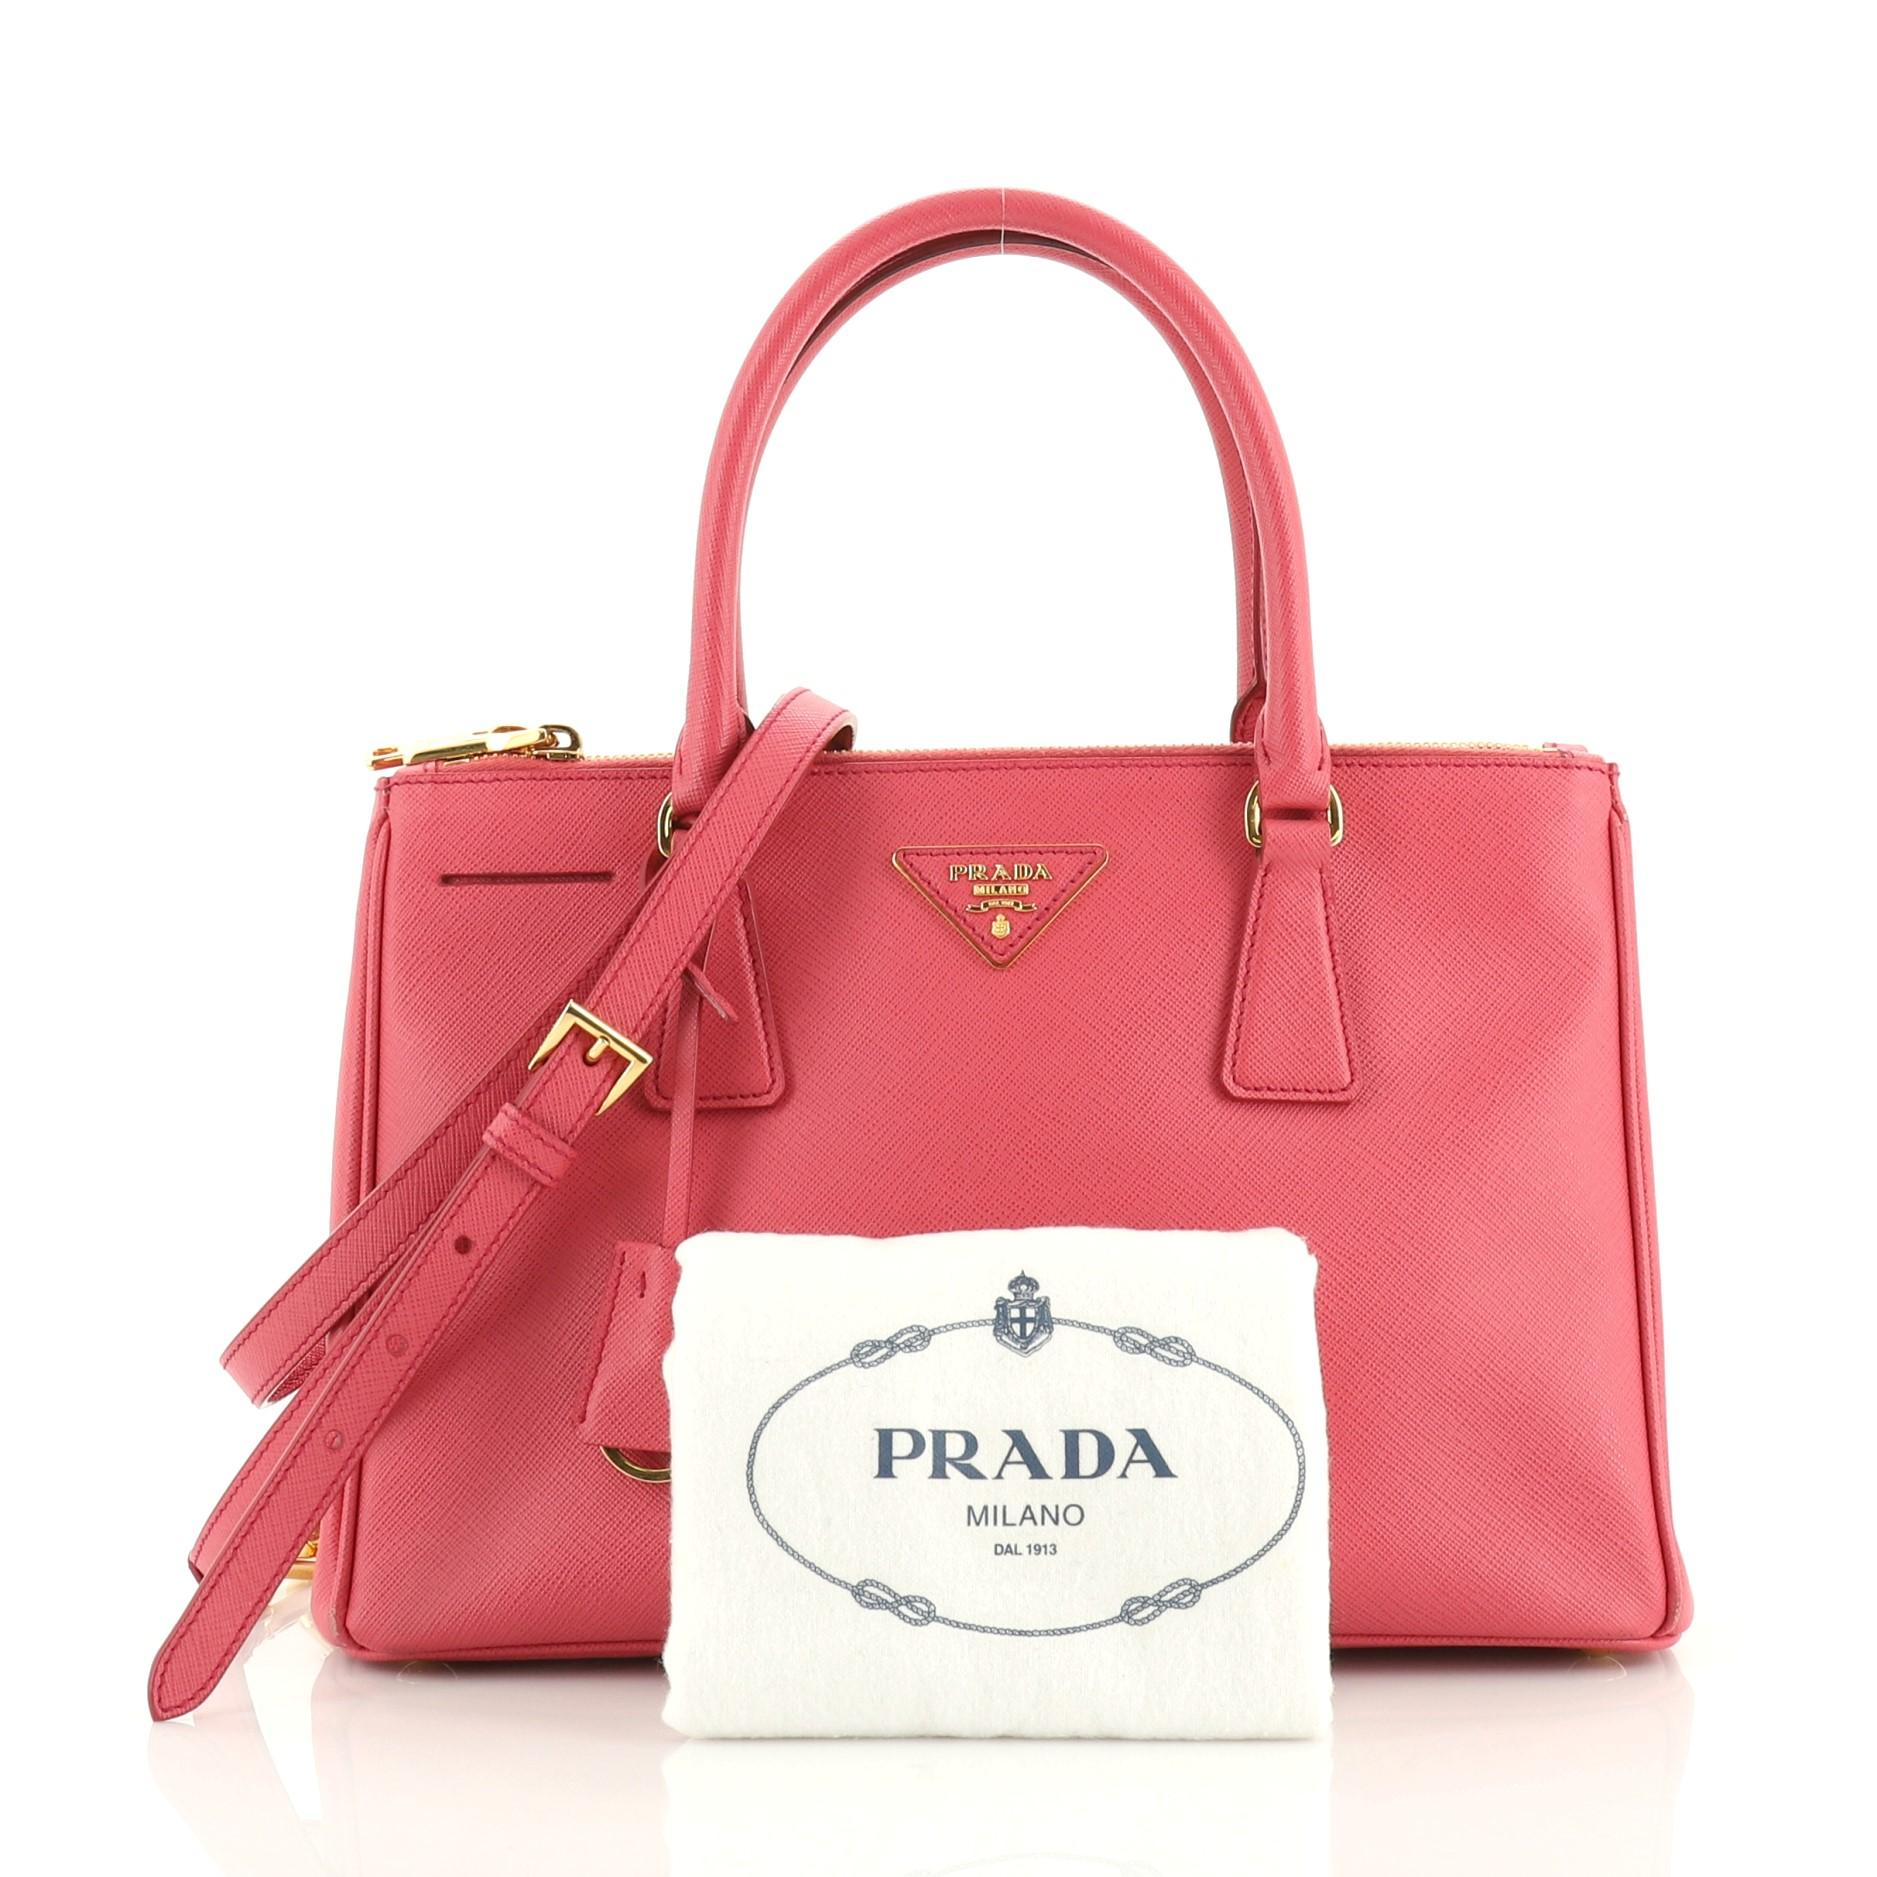 This Prada Double Zip Lux Tote Saffiano Leather Medium, crafted from pink saffiano leather, features dual rolled handles, raised Prada logo plate, and gold-tone hardware. It opens to a pink fabric and leather interior with two zip compartments on